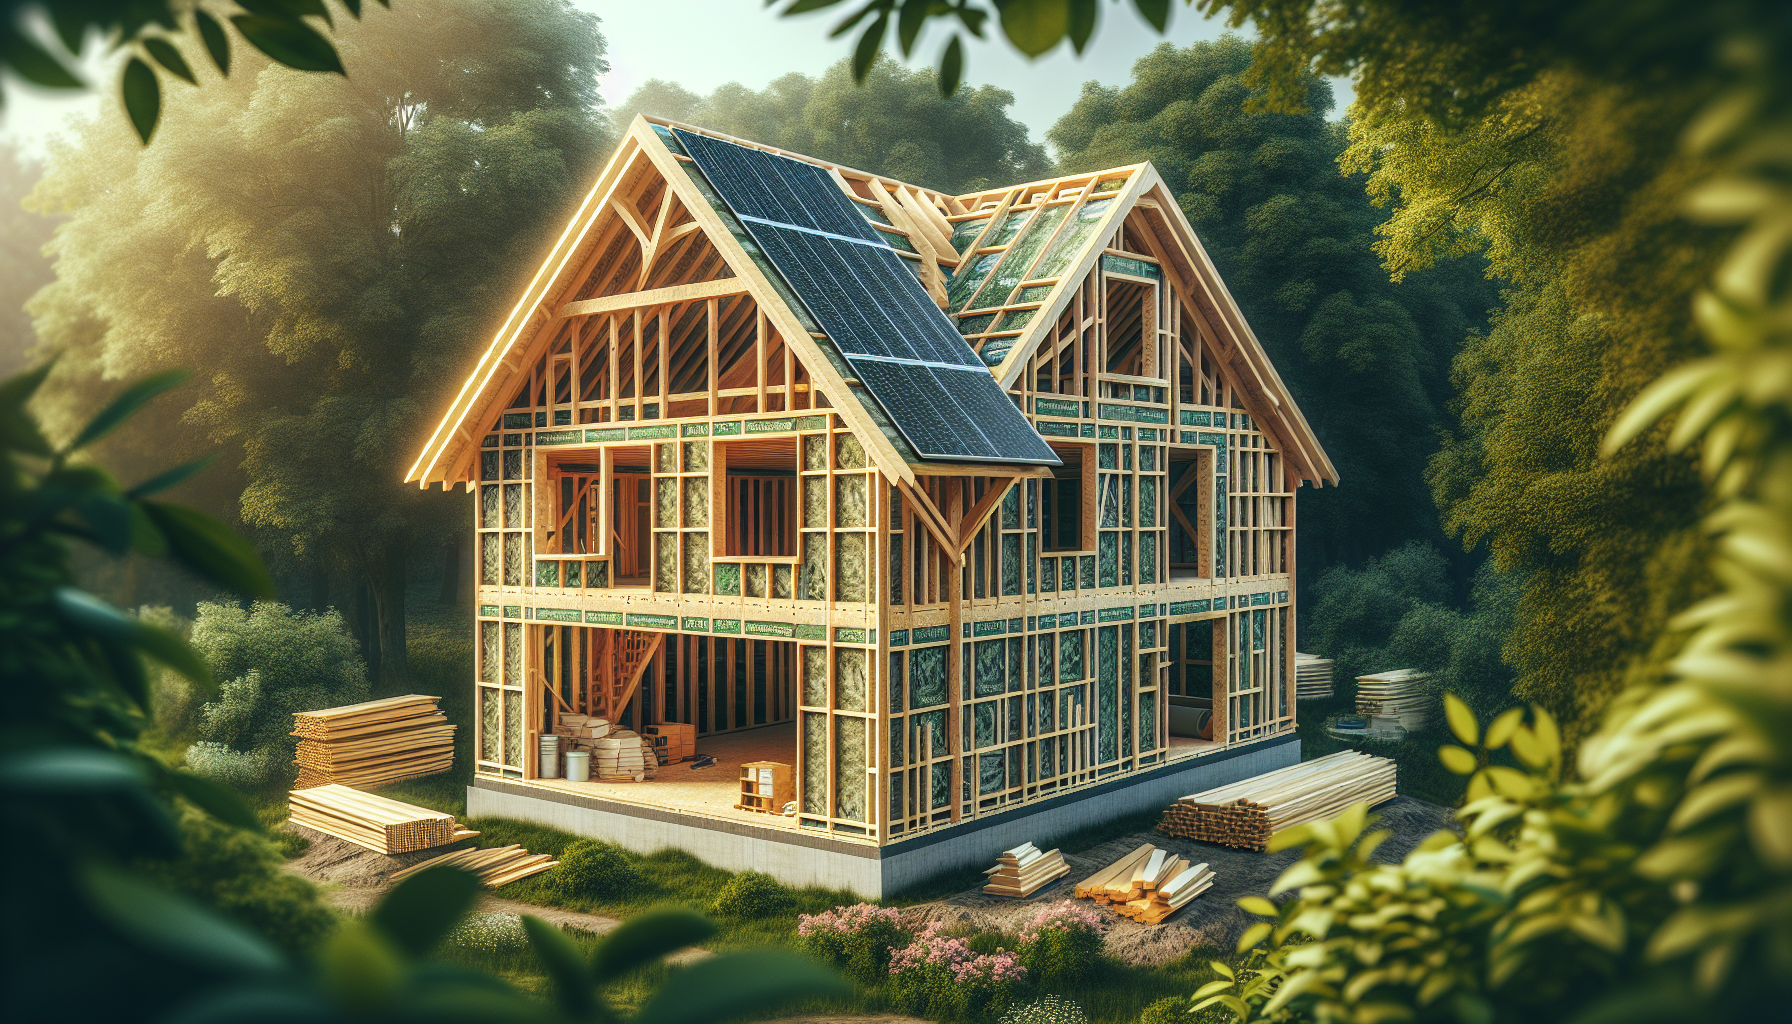 Energy-efficient timber frame construction